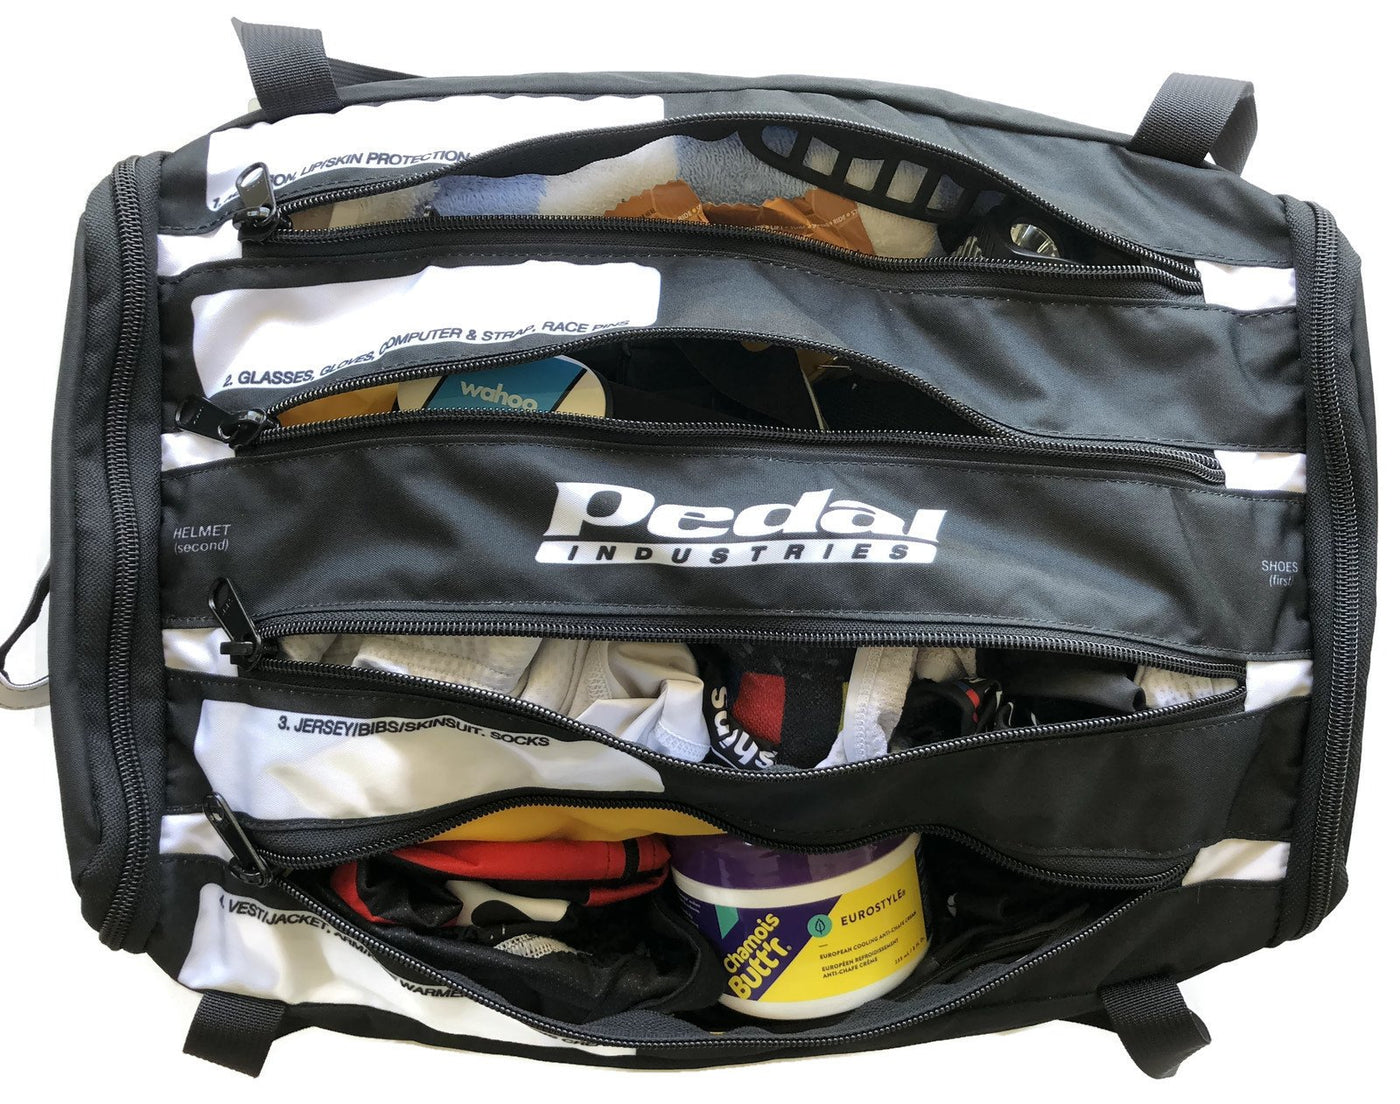 Horton TdF Cycling RACEDAY BAG - ships in about 3 weeks ISD